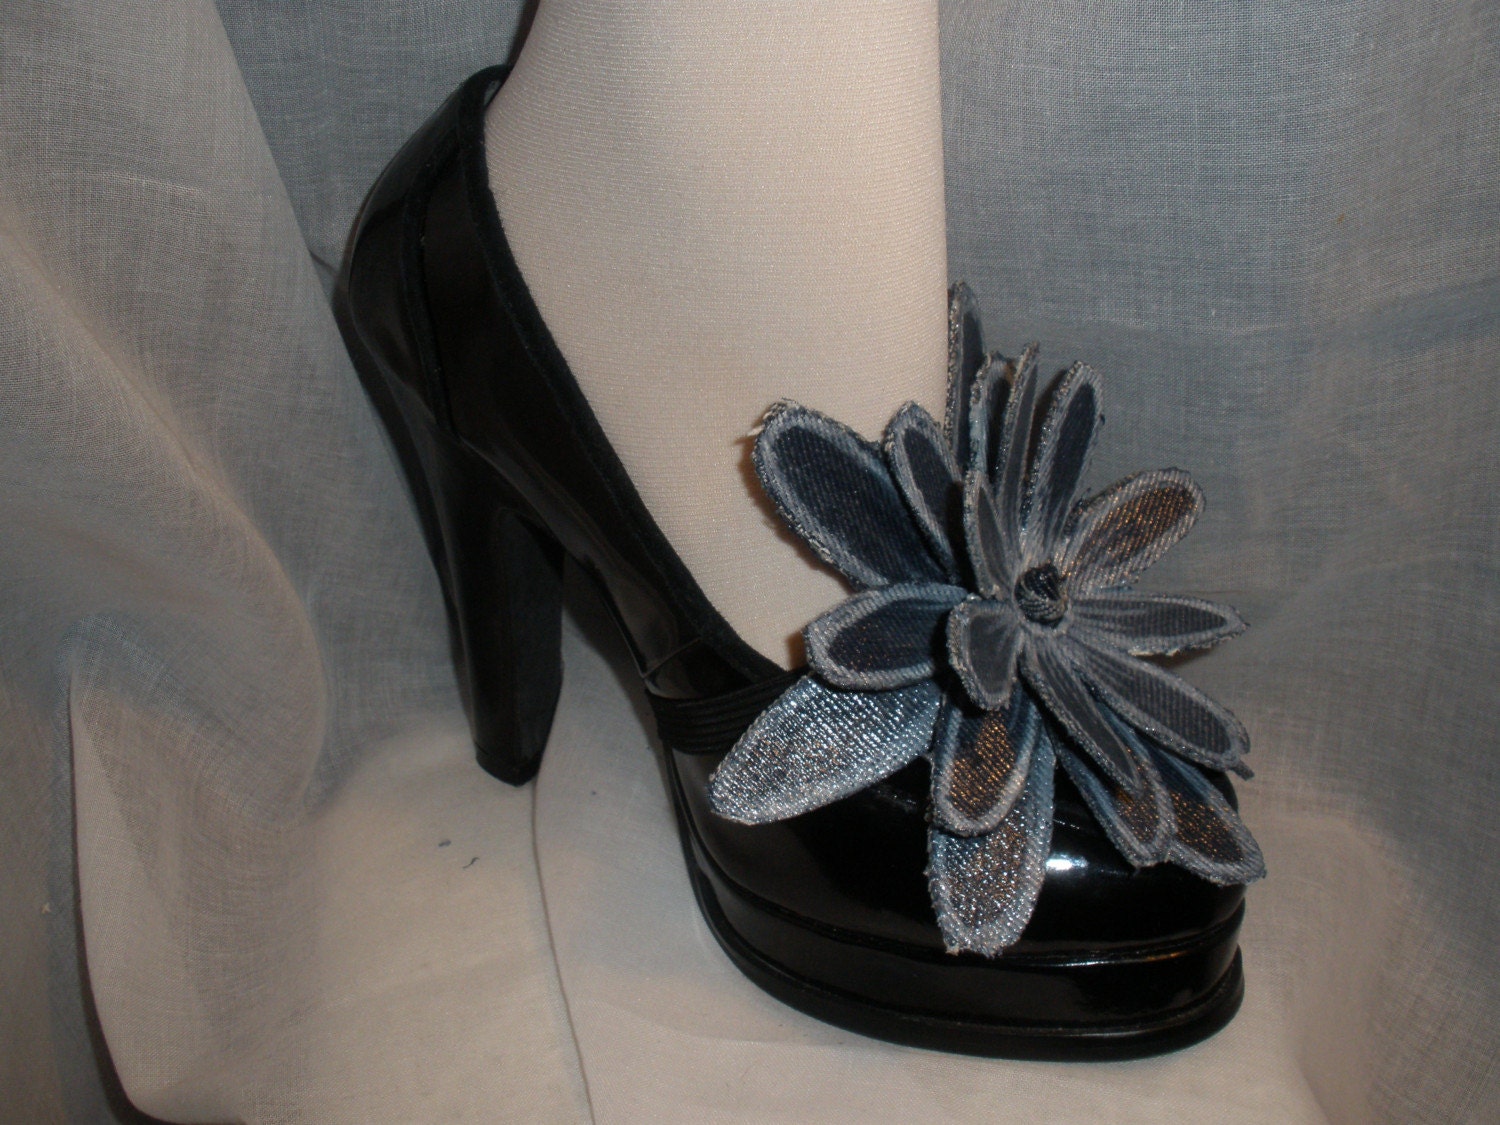 Adorable Star Burst Flower with White Tirm Wrap Accessories for Your High Heel Shoes Not Shoe Clip